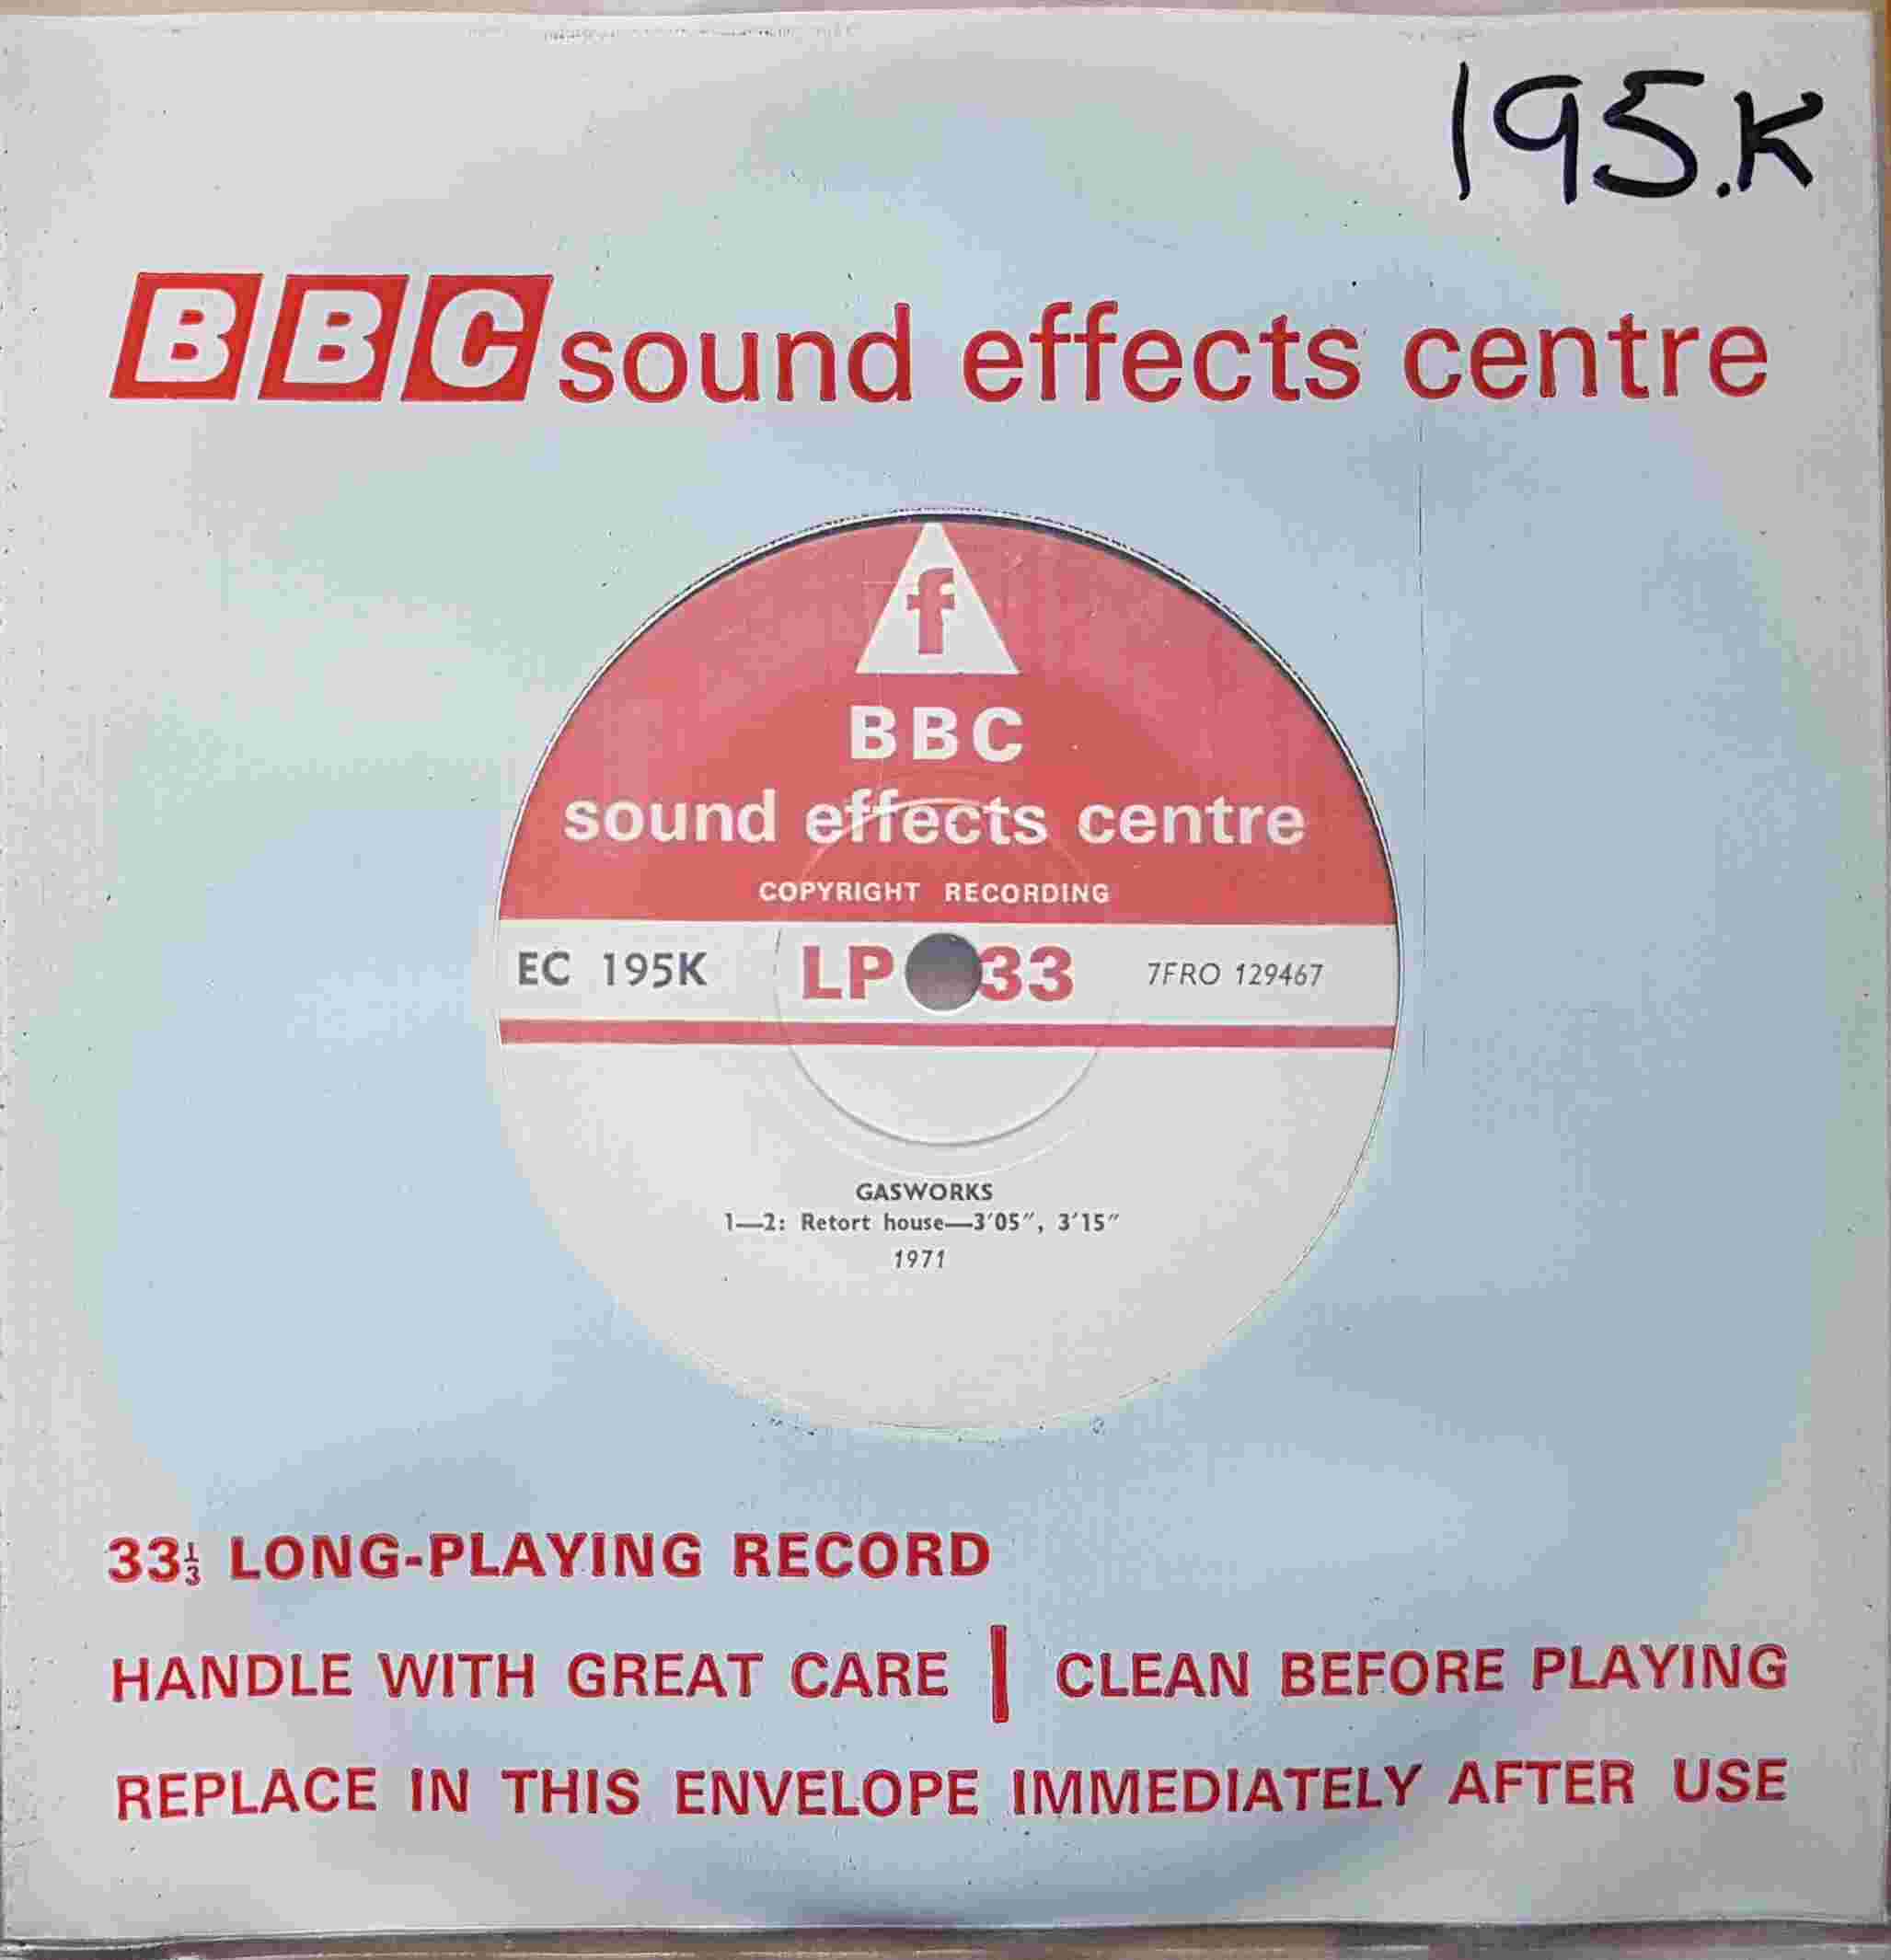 Picture of EC 195K Gasworks by artist Not registered from the BBC records and Tapes library